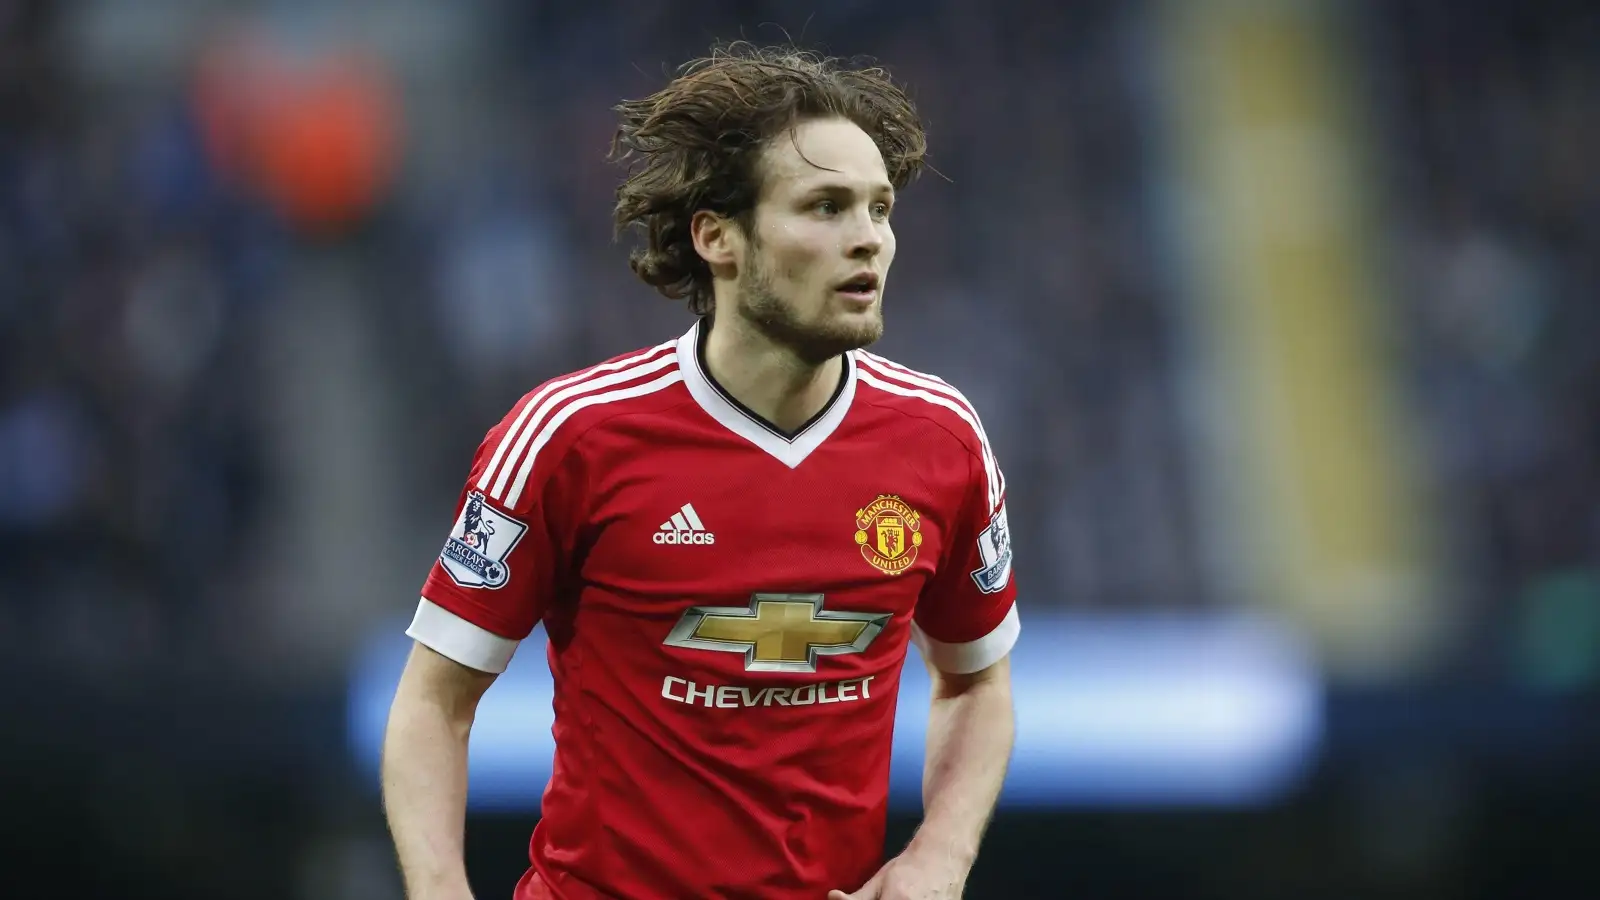 Daley Blind playing for Manchester United during a Premier League game against Manchester City. Etihad Stadium, March 2016.